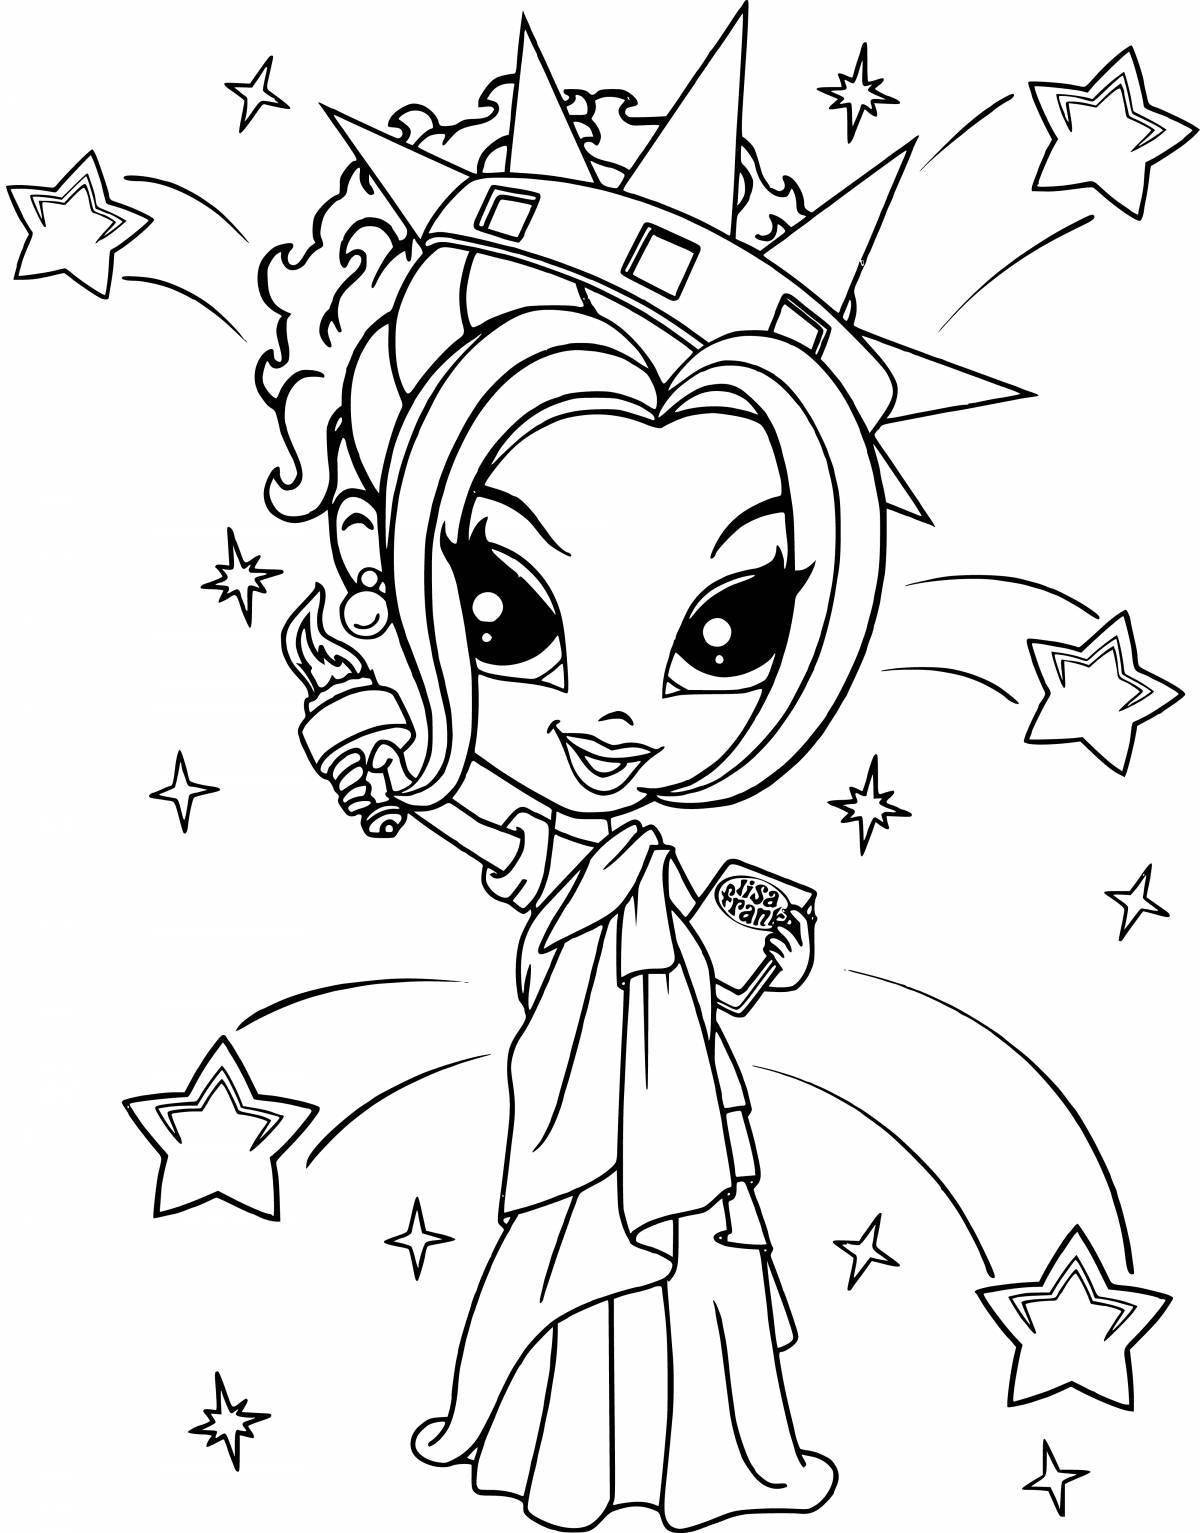 Playful coloring book for girls